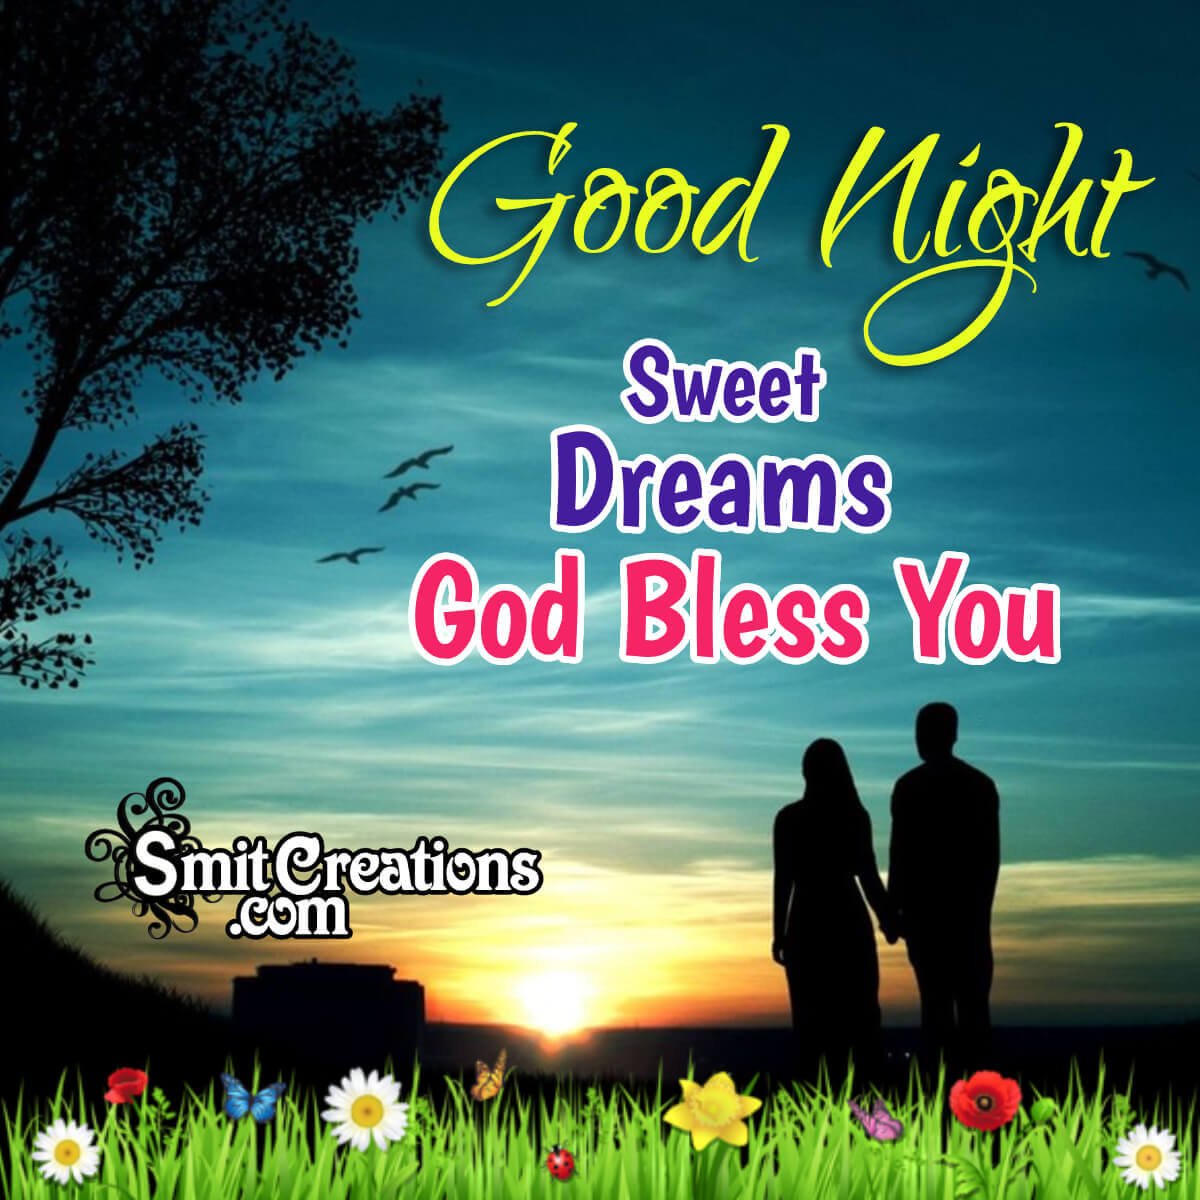 Best Good Night Sweet Dreams God Bless You Image